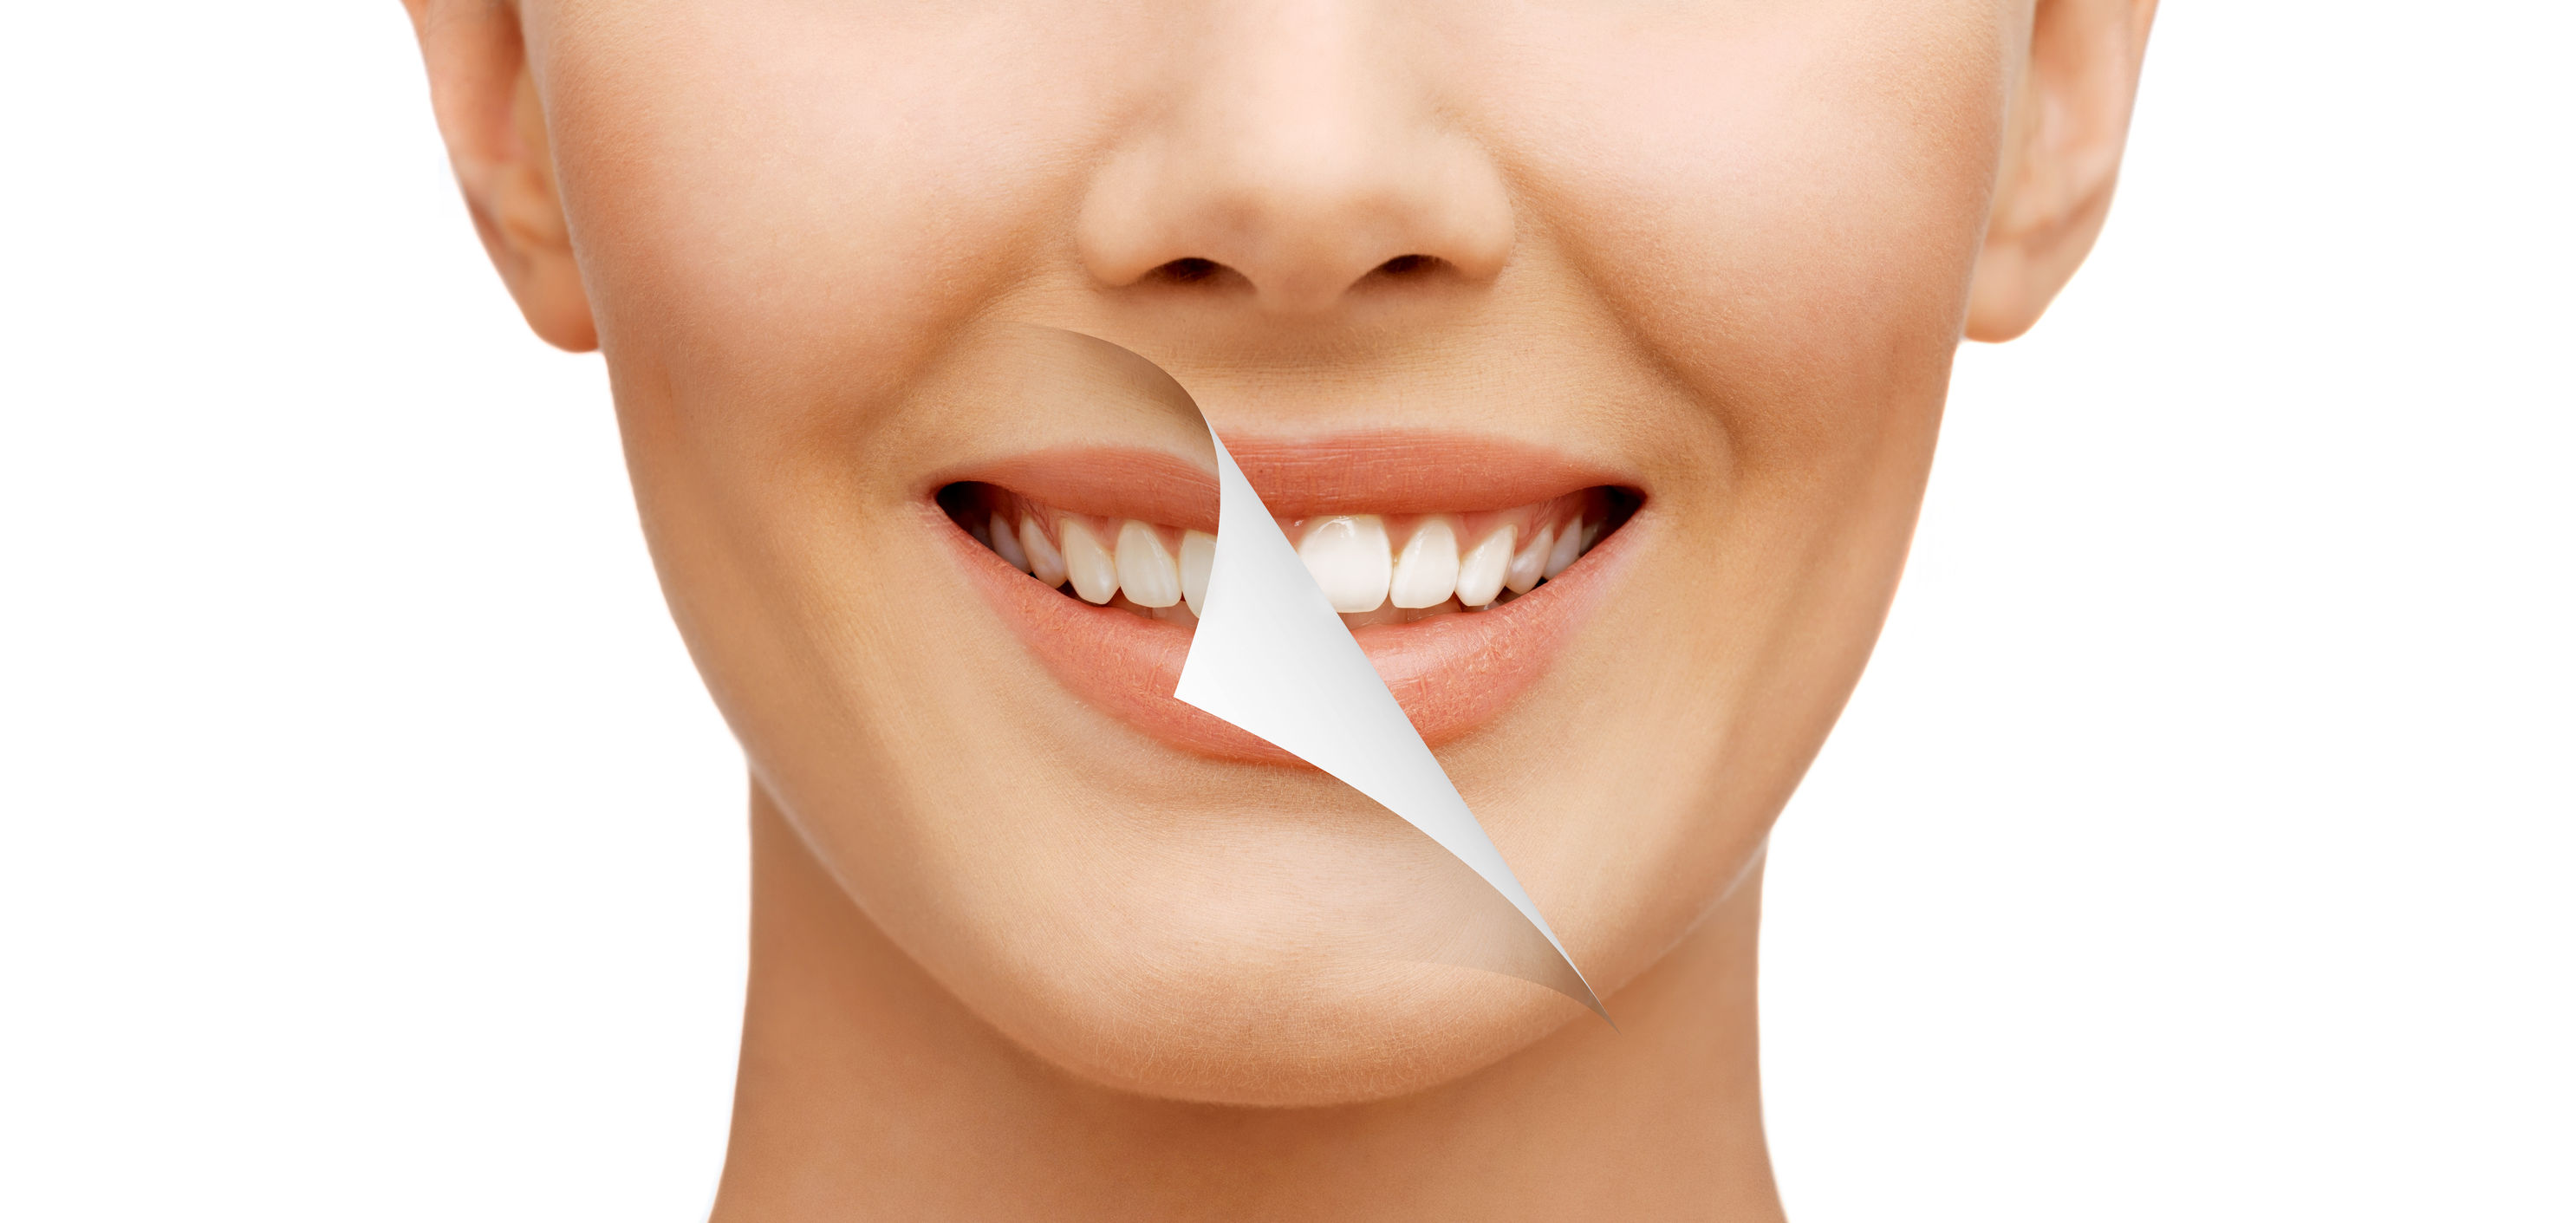 Where Can I Find Exceptional Cosmetic Dentistry Louisville?